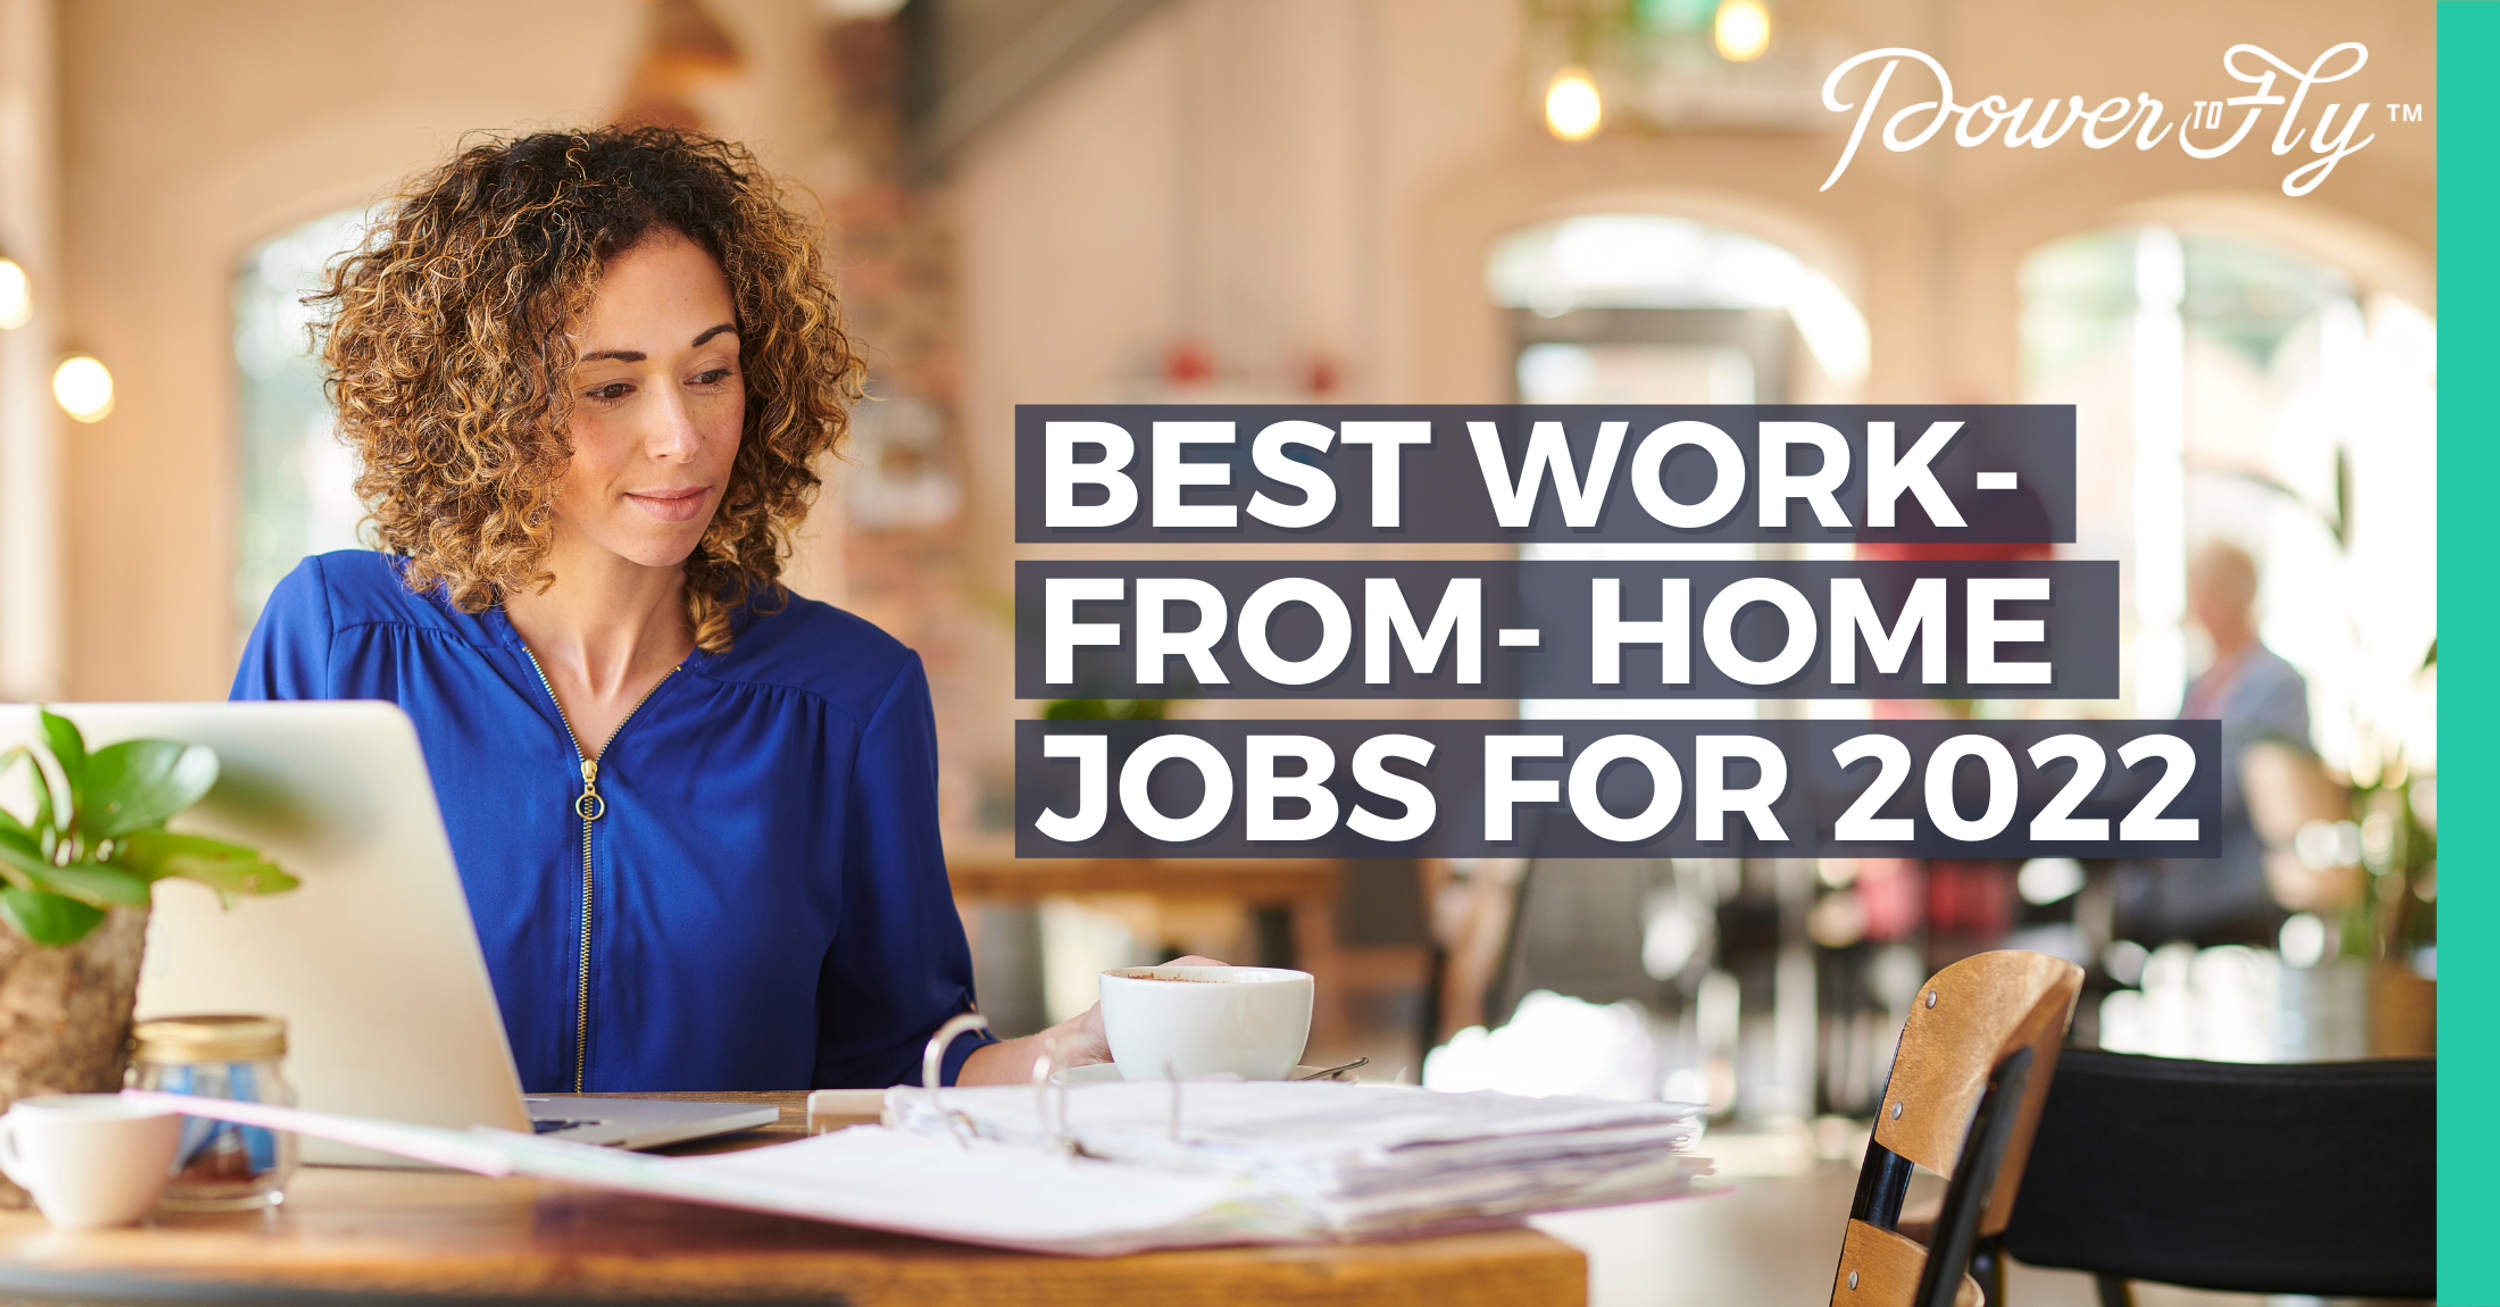 Best Work From Home Jobs 2022